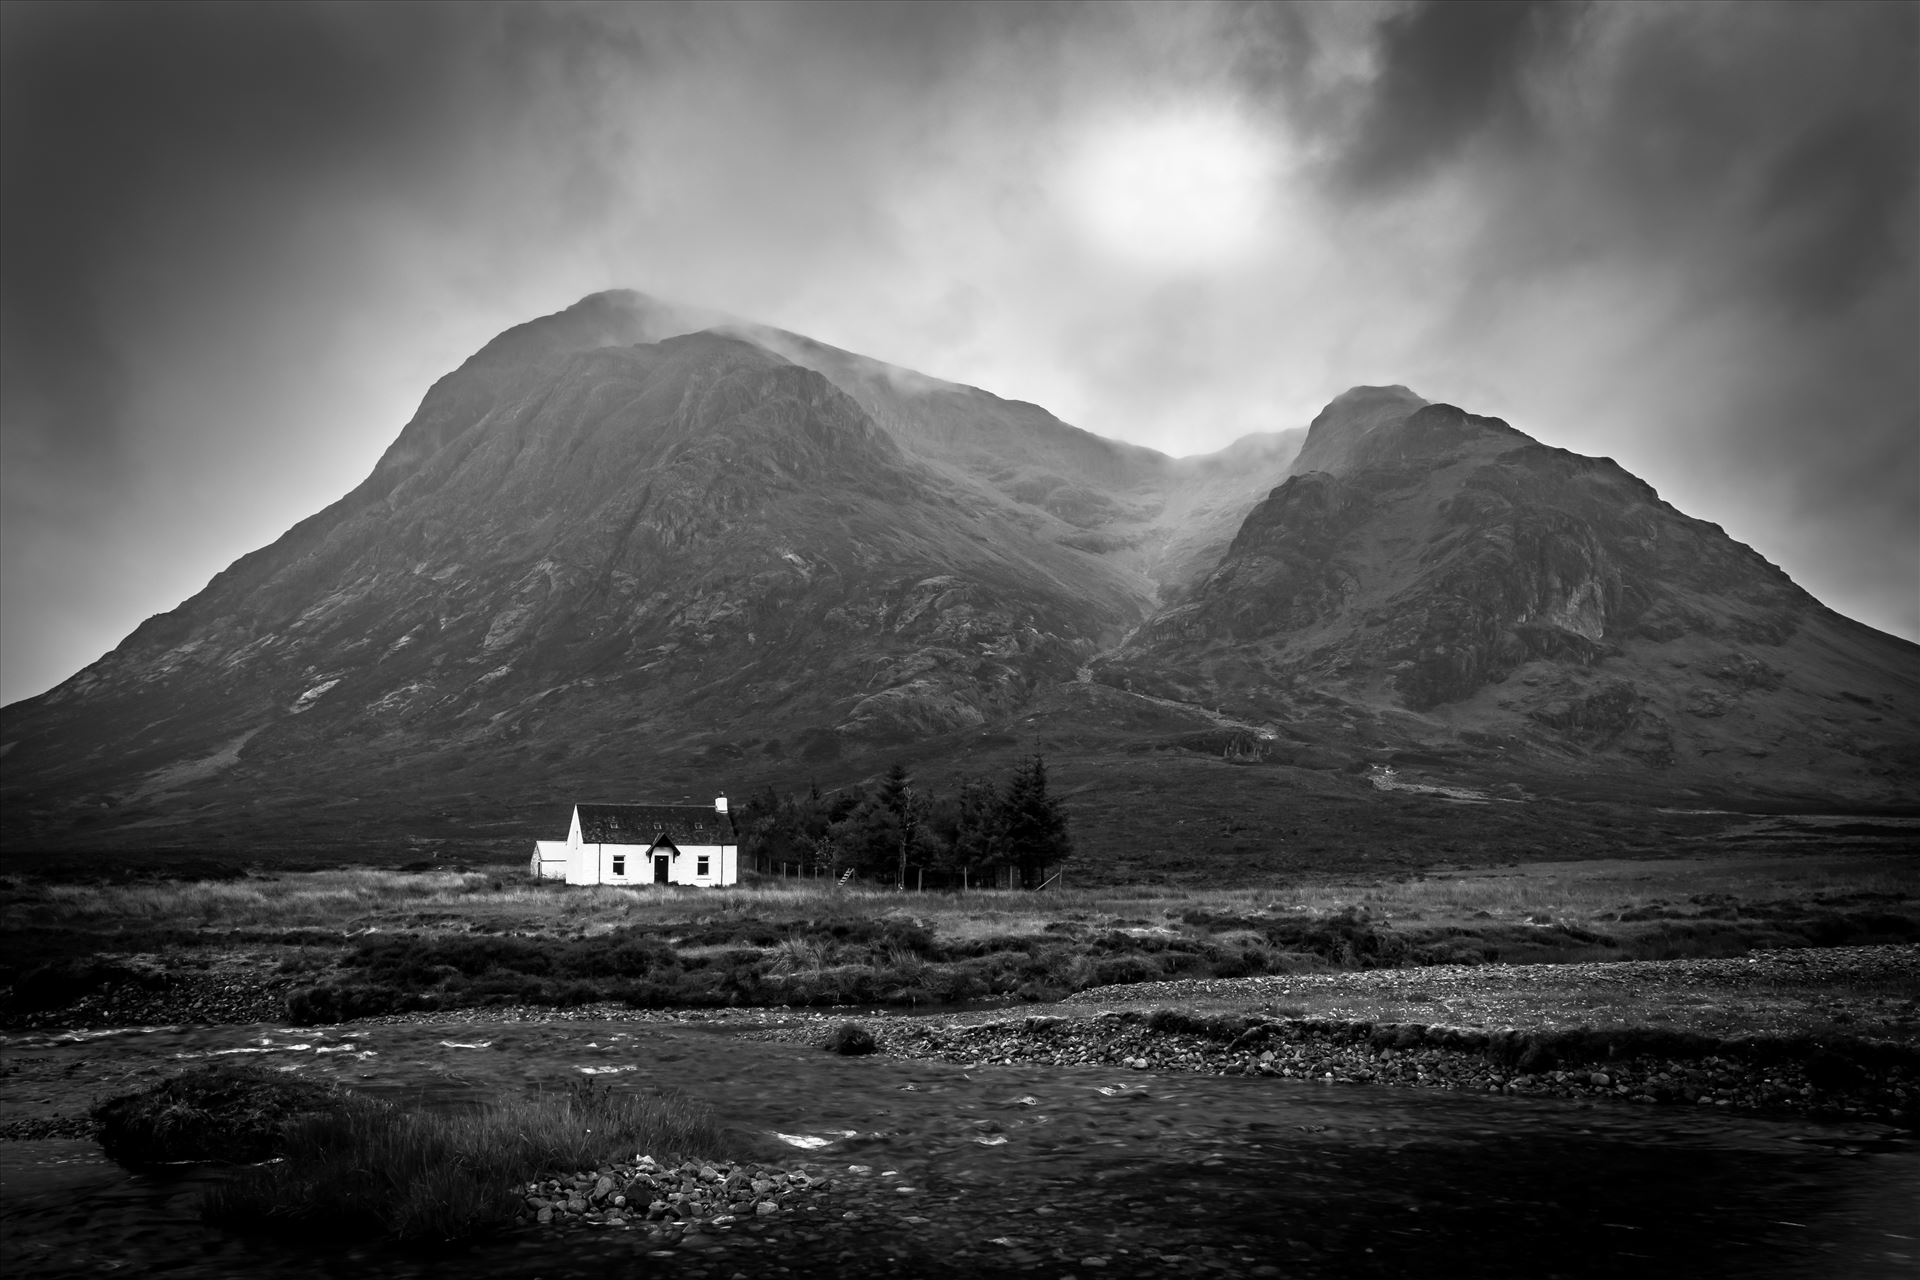 Lagangarbh hut - This hut is owned by the Scottish Mountaineering Club & sits at the base of Buachaille Etive Mor. by philreay